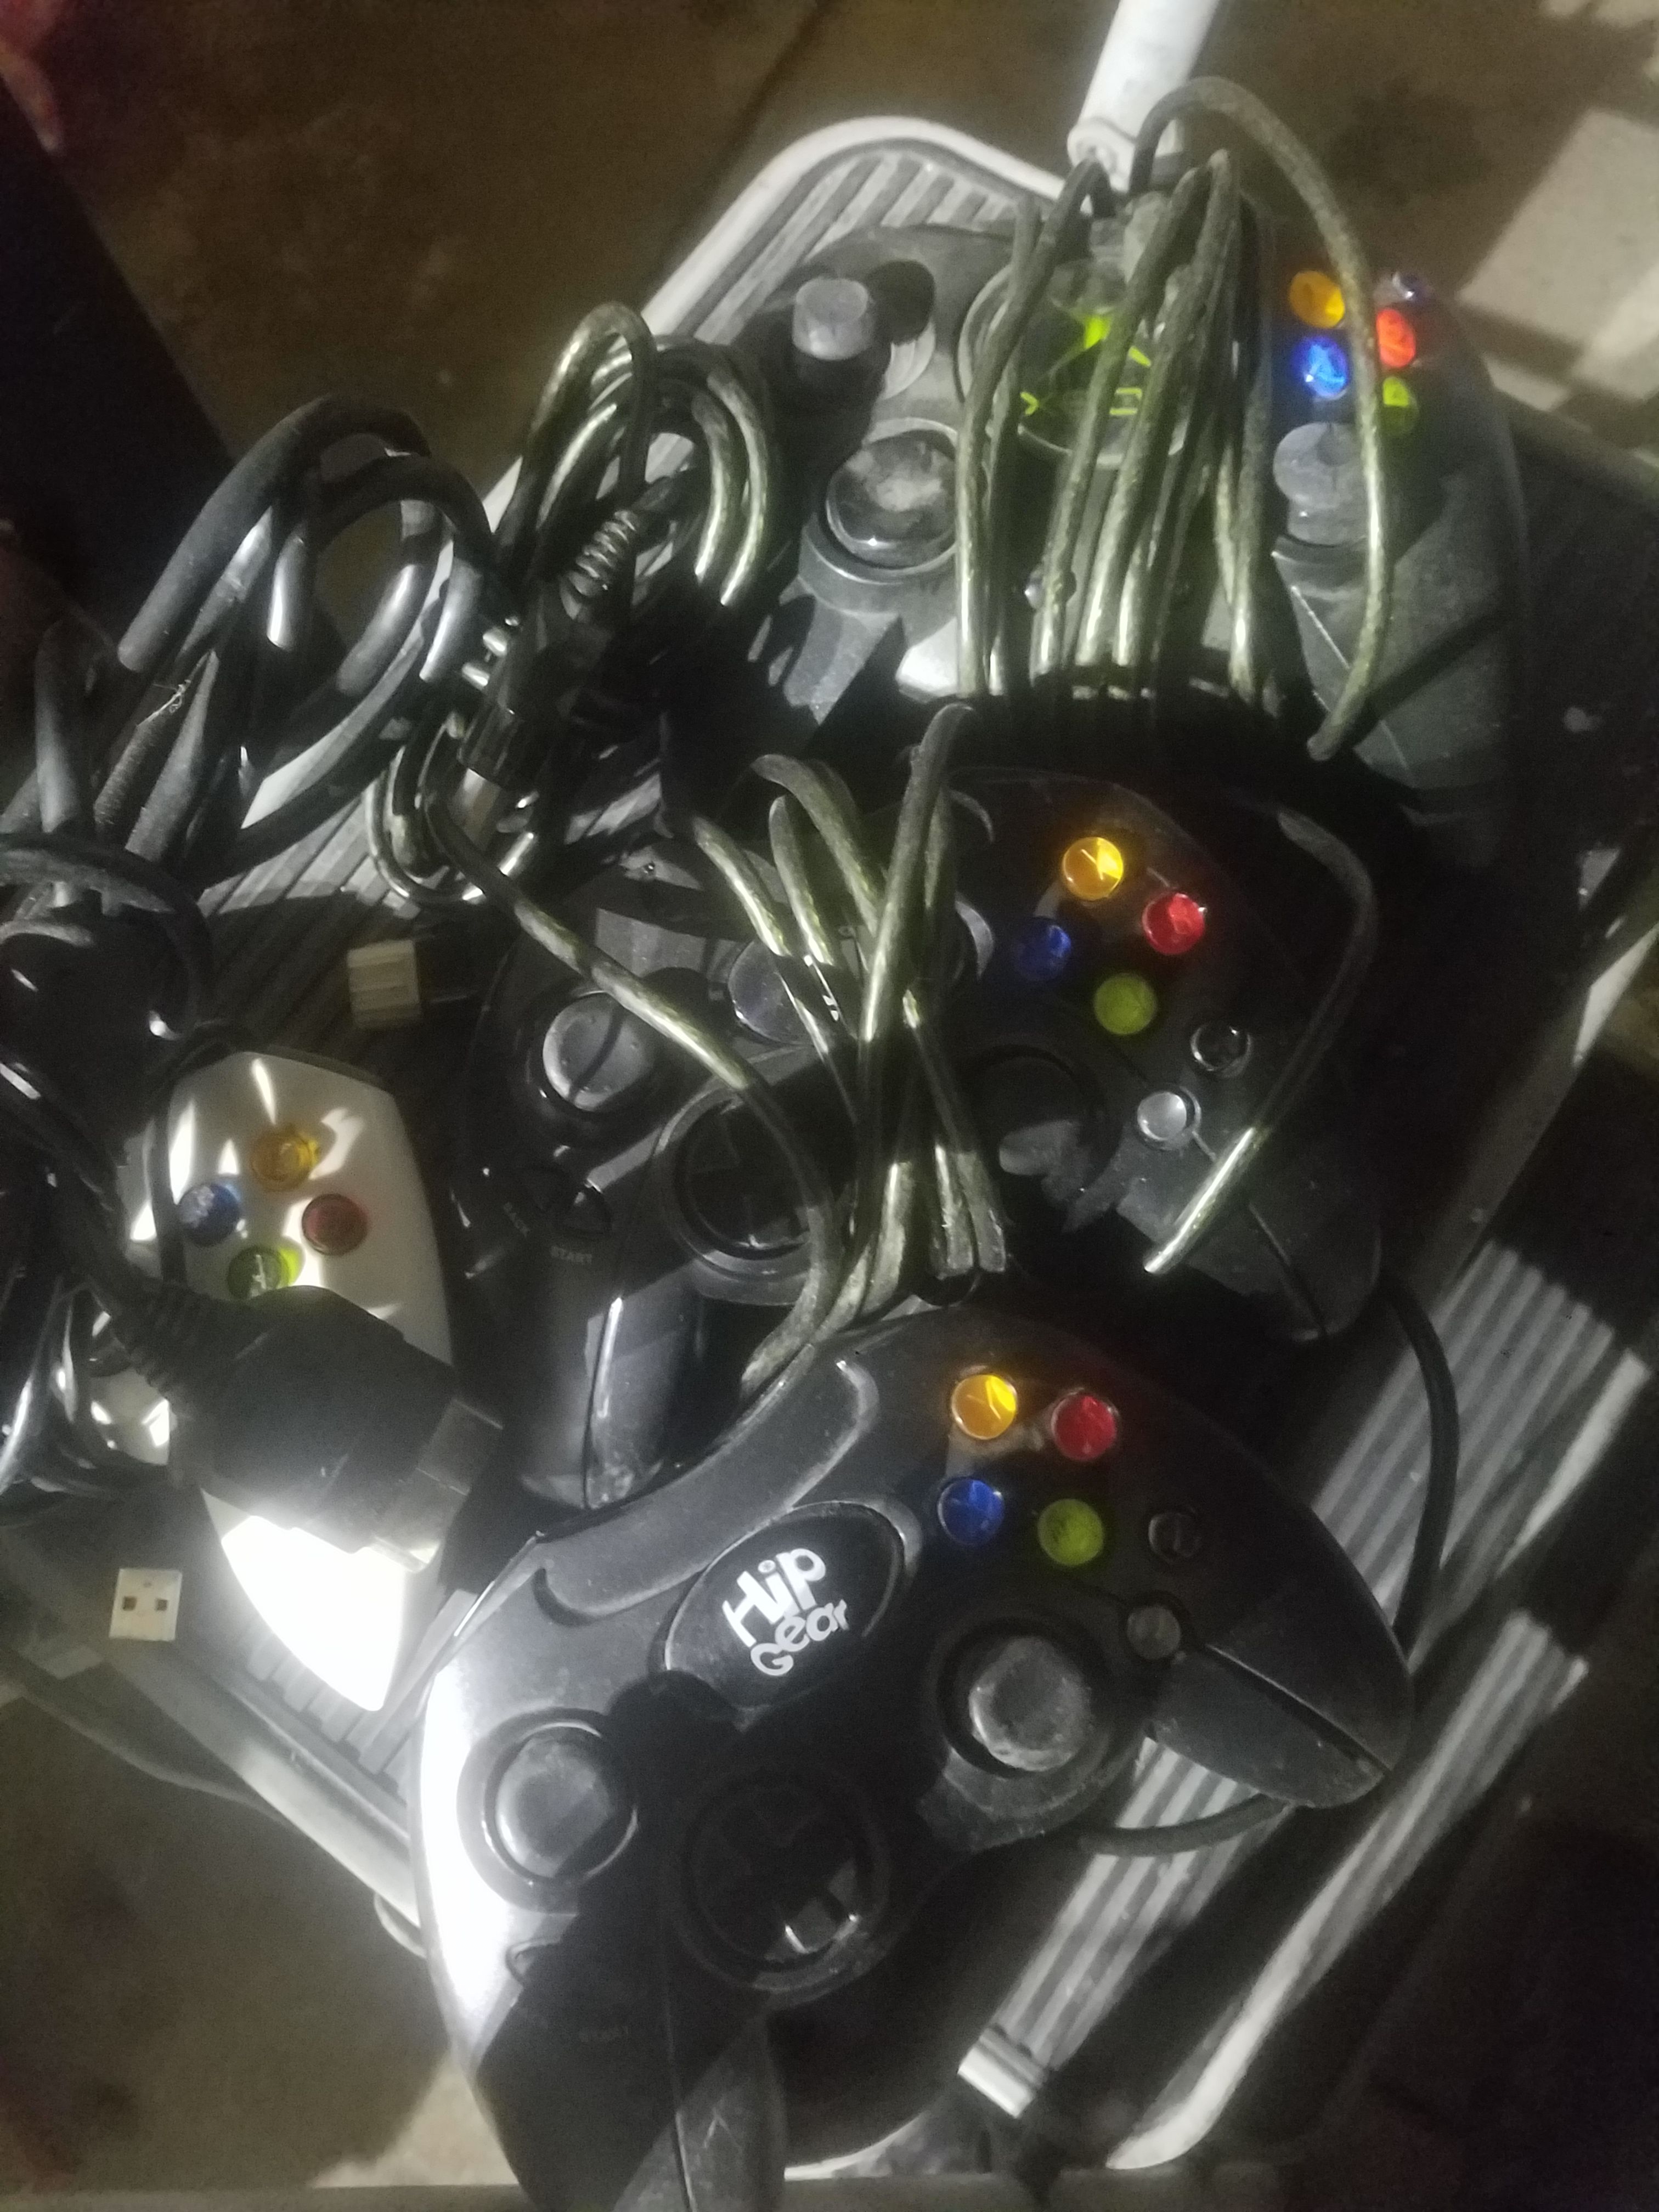 Xbox remote control and wires